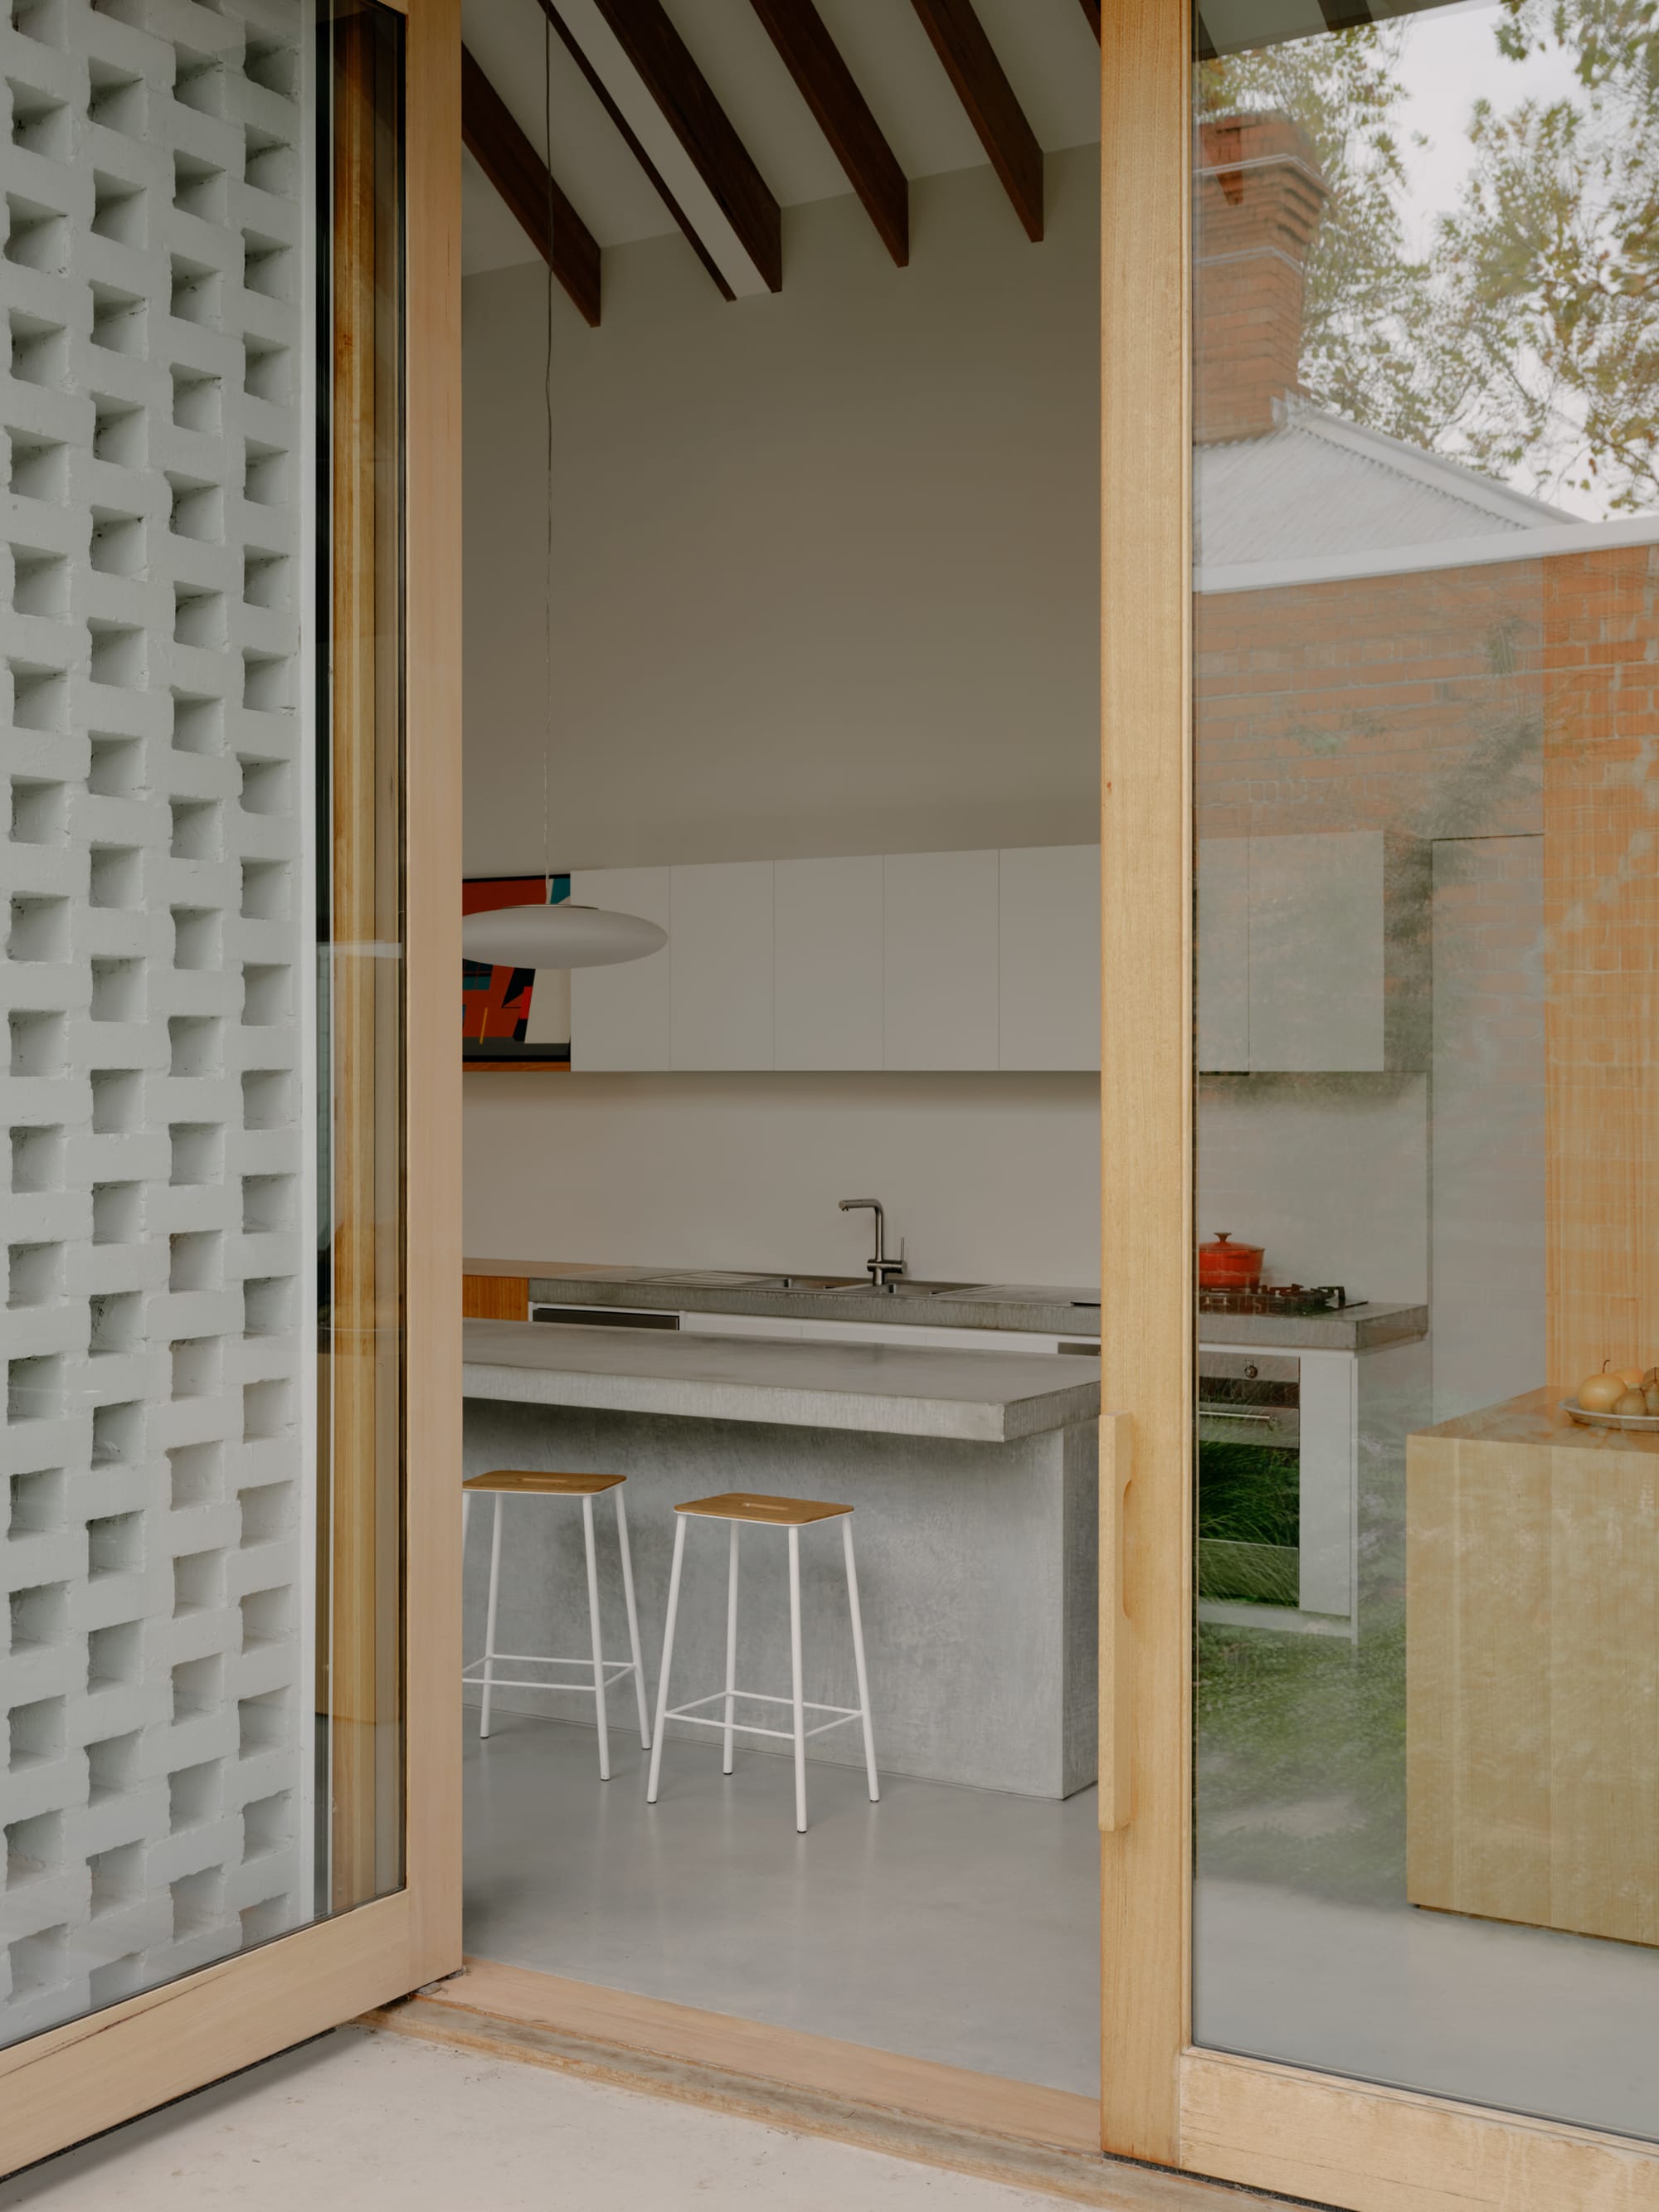 Corymbia by Karen Abernethy Architects. Photography by Tom Ross. Timber framed glass door leading from kitchen to outside area. Concrete floors and benches inside. 